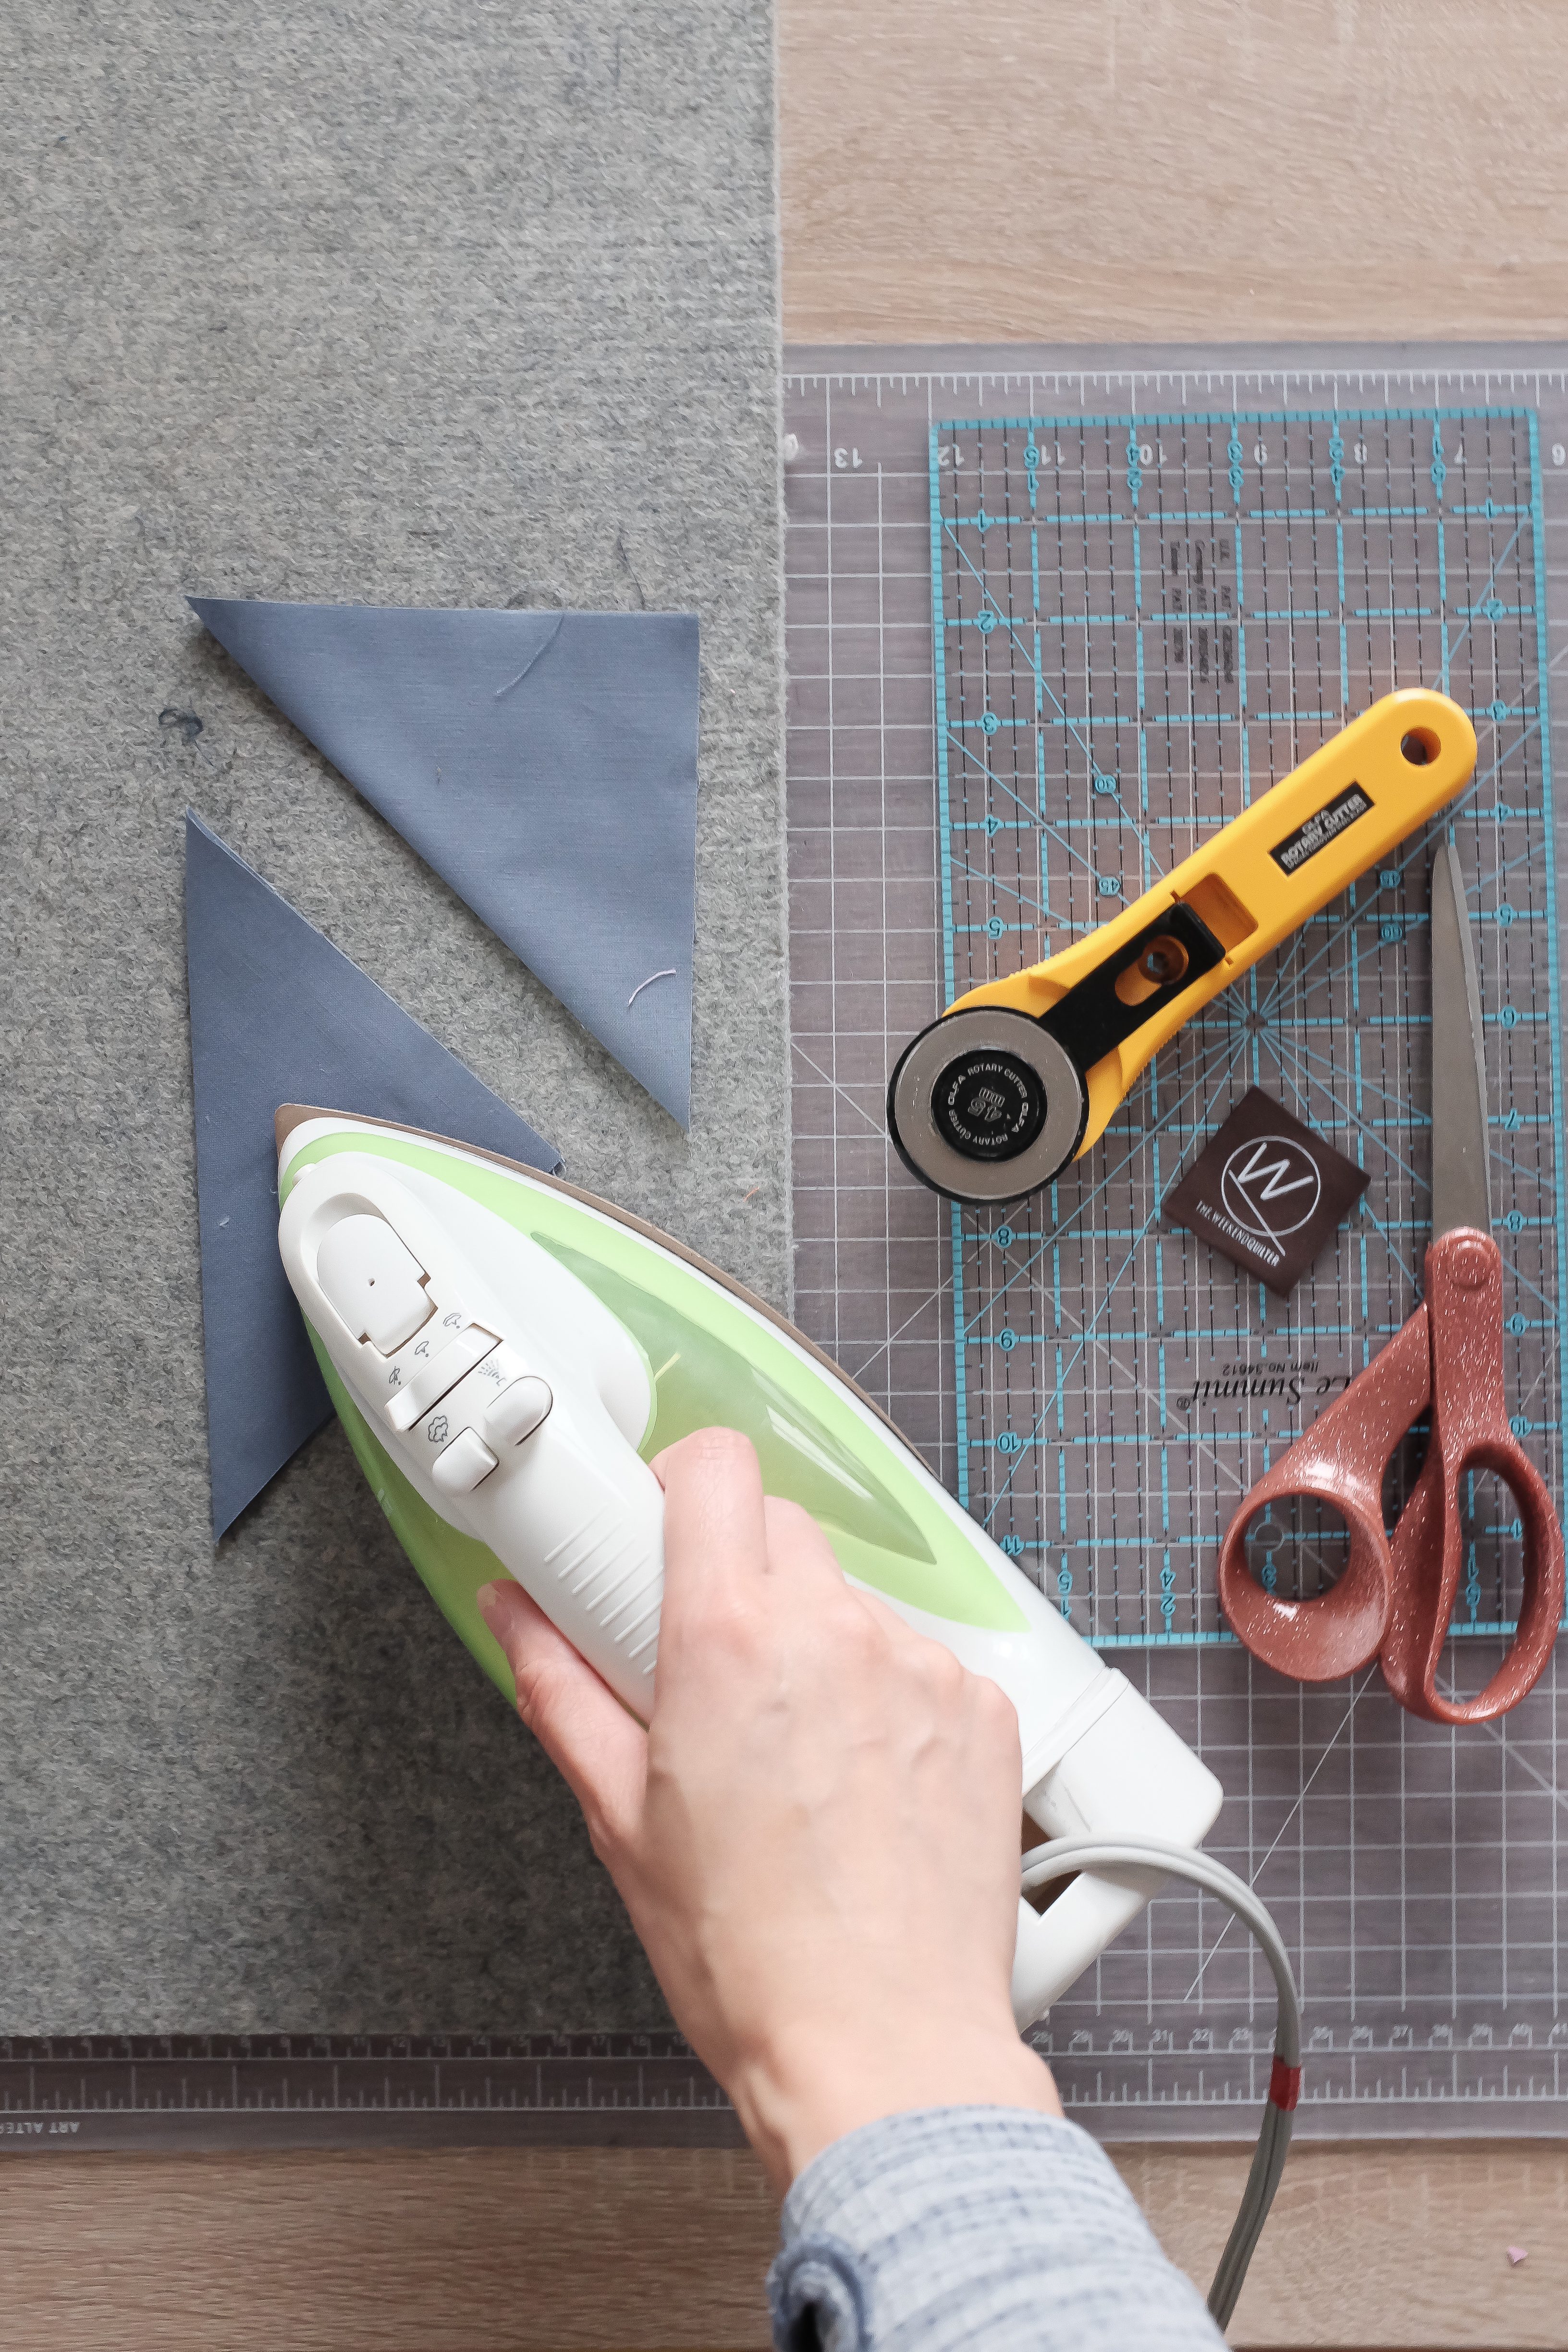 An iron pressing fabric in half, a rotary cutter, and scissors.